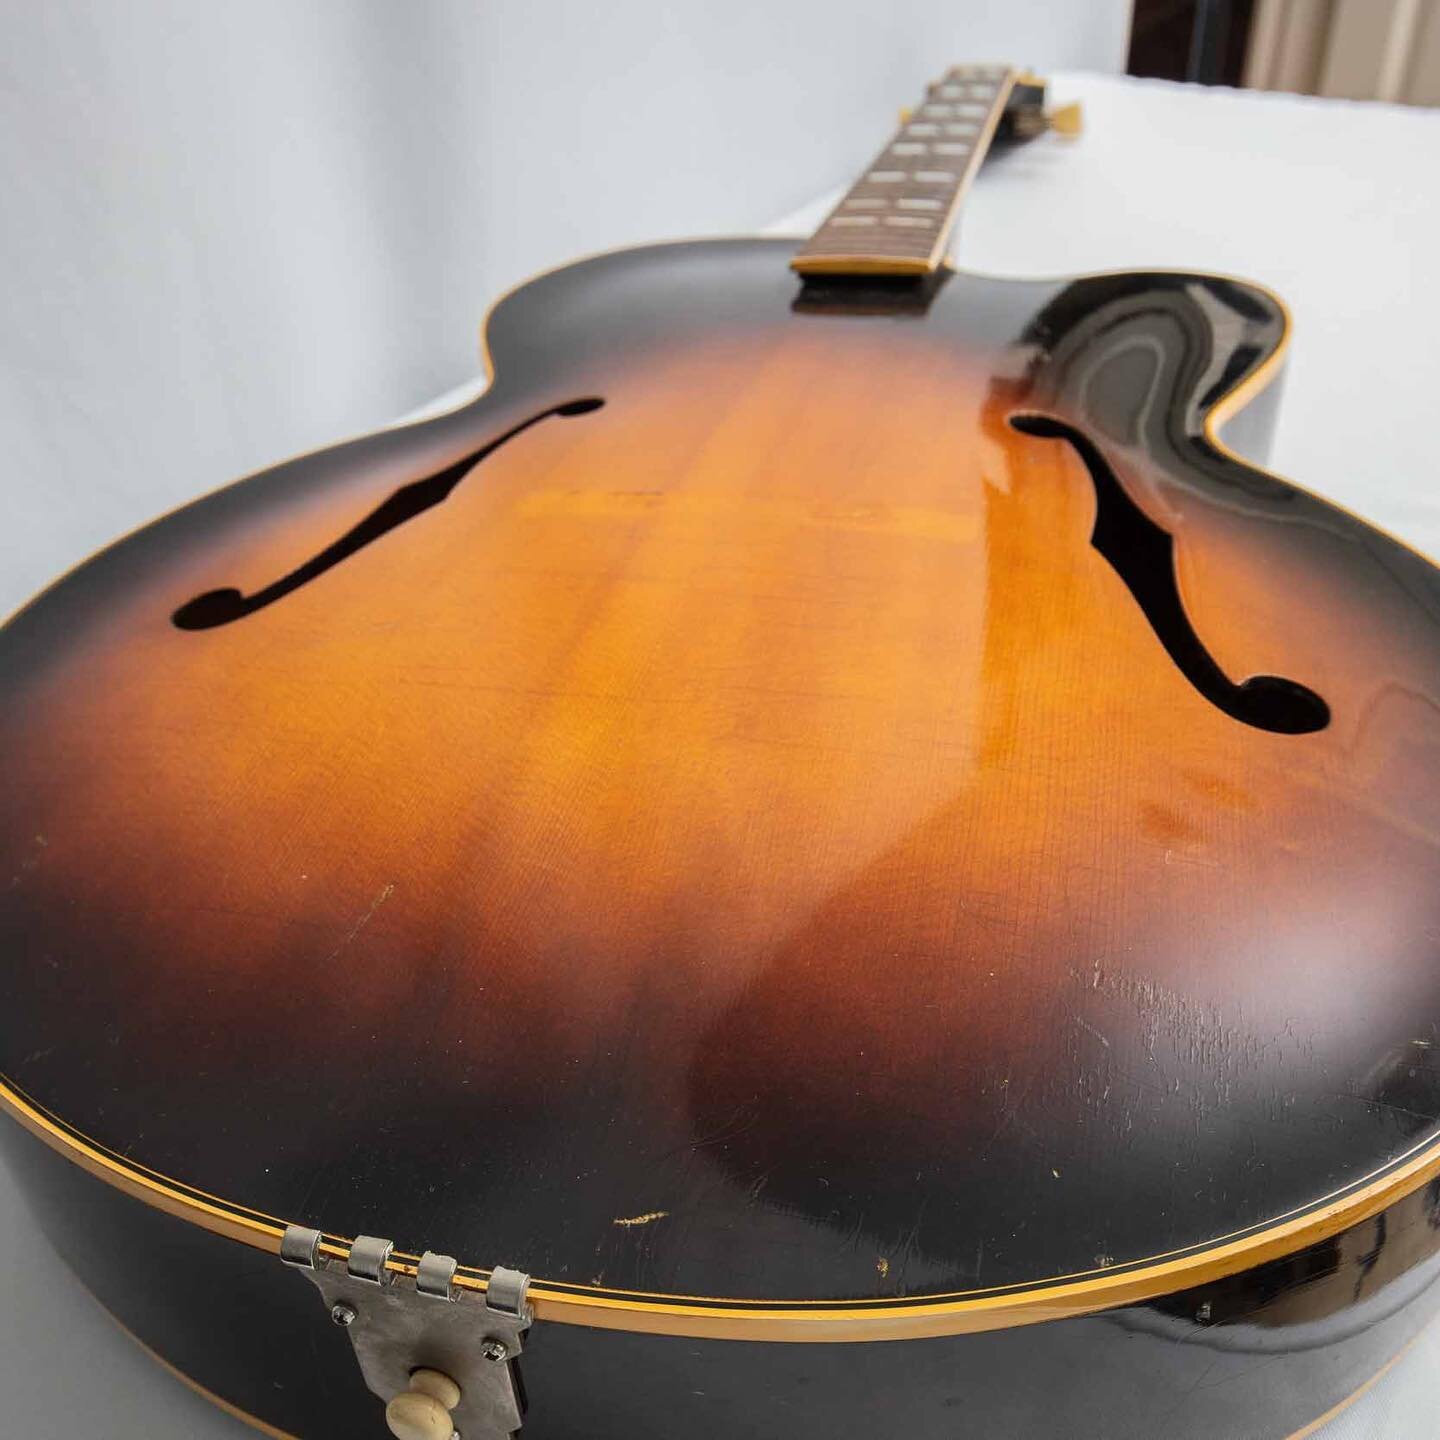 A stunning #gibson L-7C Archtop 1954 acoustic guitar! Plus some other great musical instruments. Available for sale in a half hour! #linkinbio 👈
.
.
.

#pasadena #pasadenacalifornia #losangeles #estatesale #estatesales #estatesaleshopping #estatesal